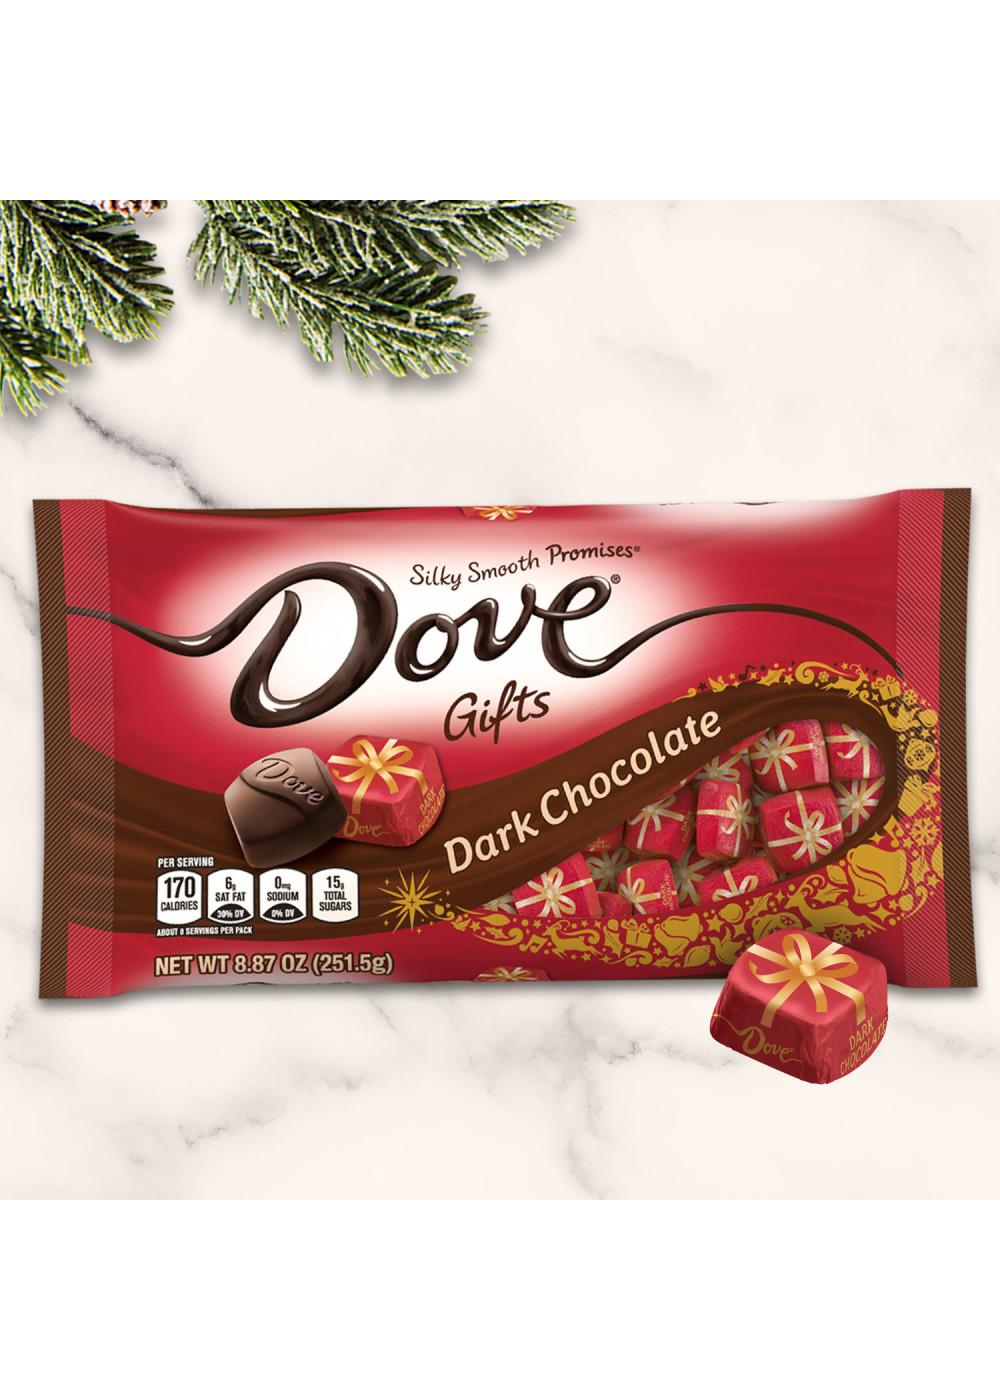 Dove Gifts Dark Chocolate Holiday Candy; image 3 of 8